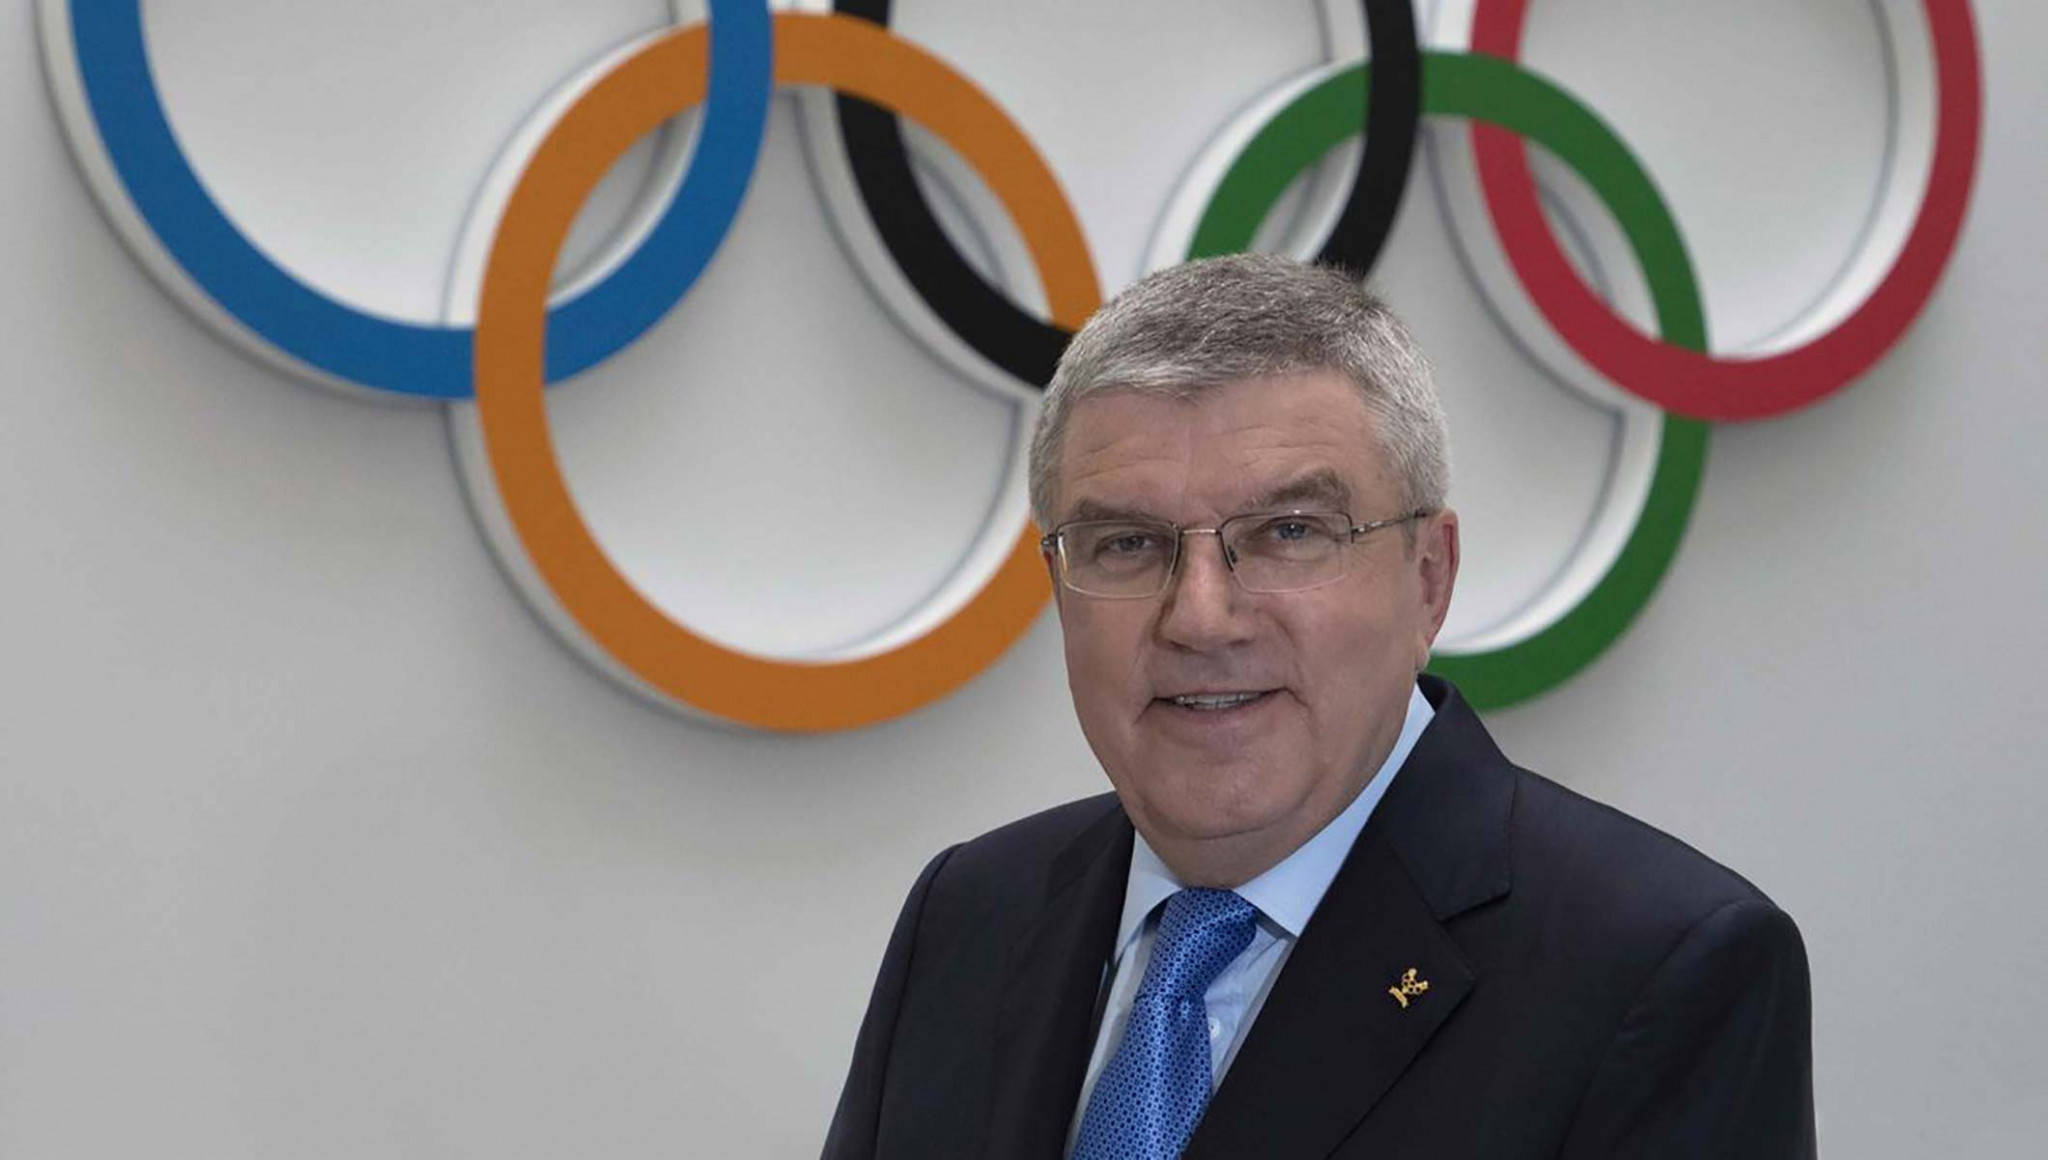 IOC President Thomas Bach has claimed that the Russian Olympic Committee "has served its sanction" after they were suspended from Pyeongchang 2018 ©IOC